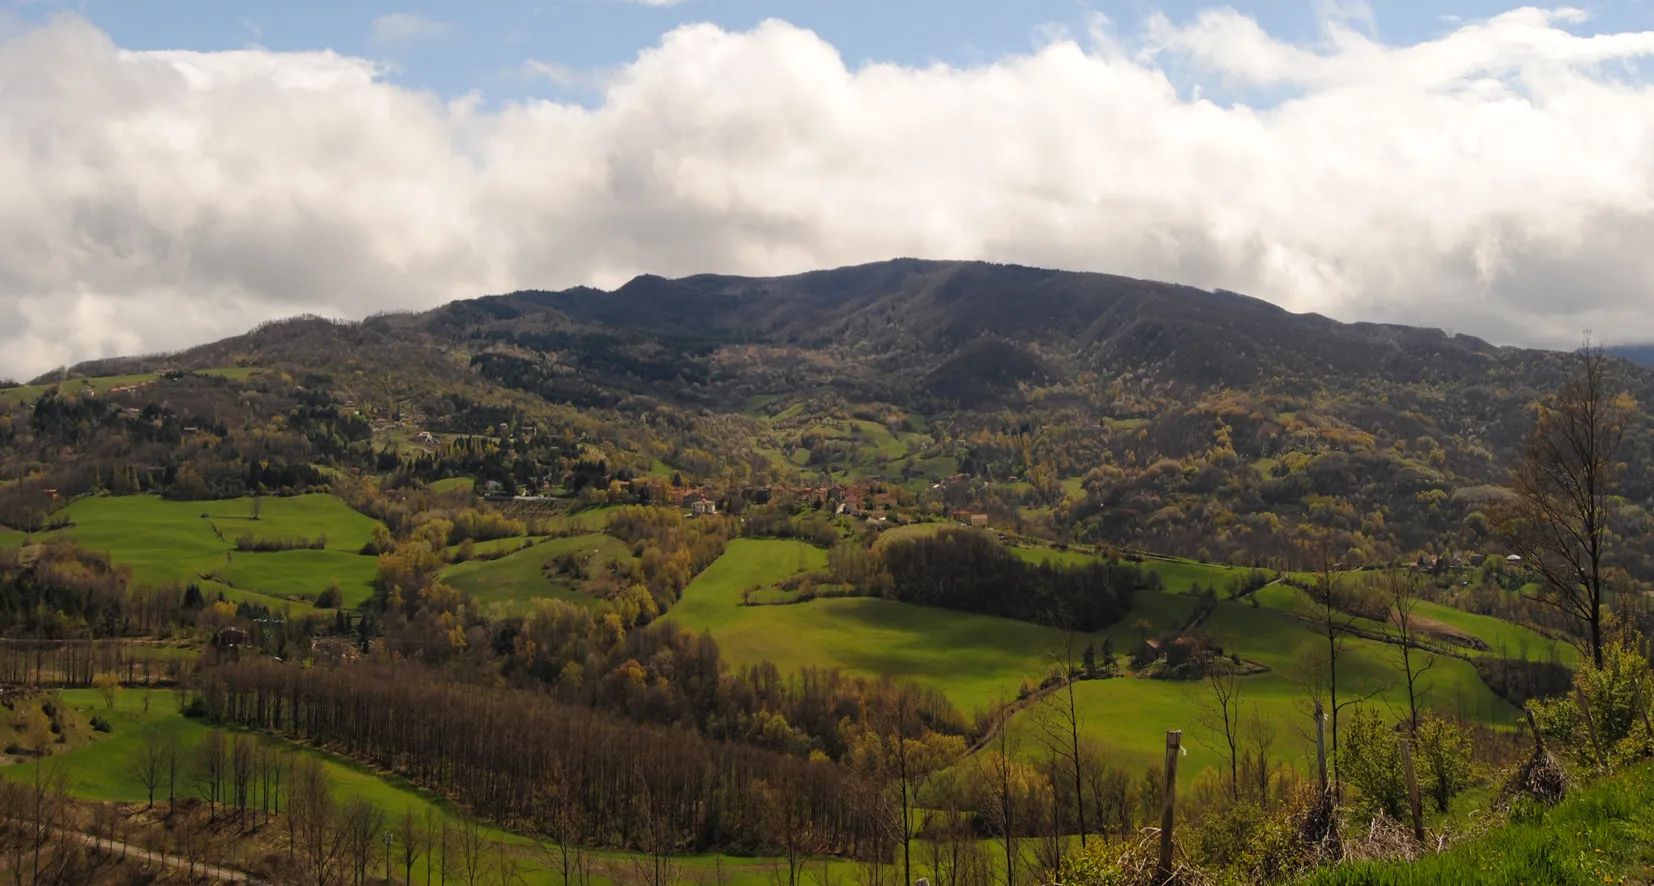 Photo showing: The "Alpe" of Monghidoro